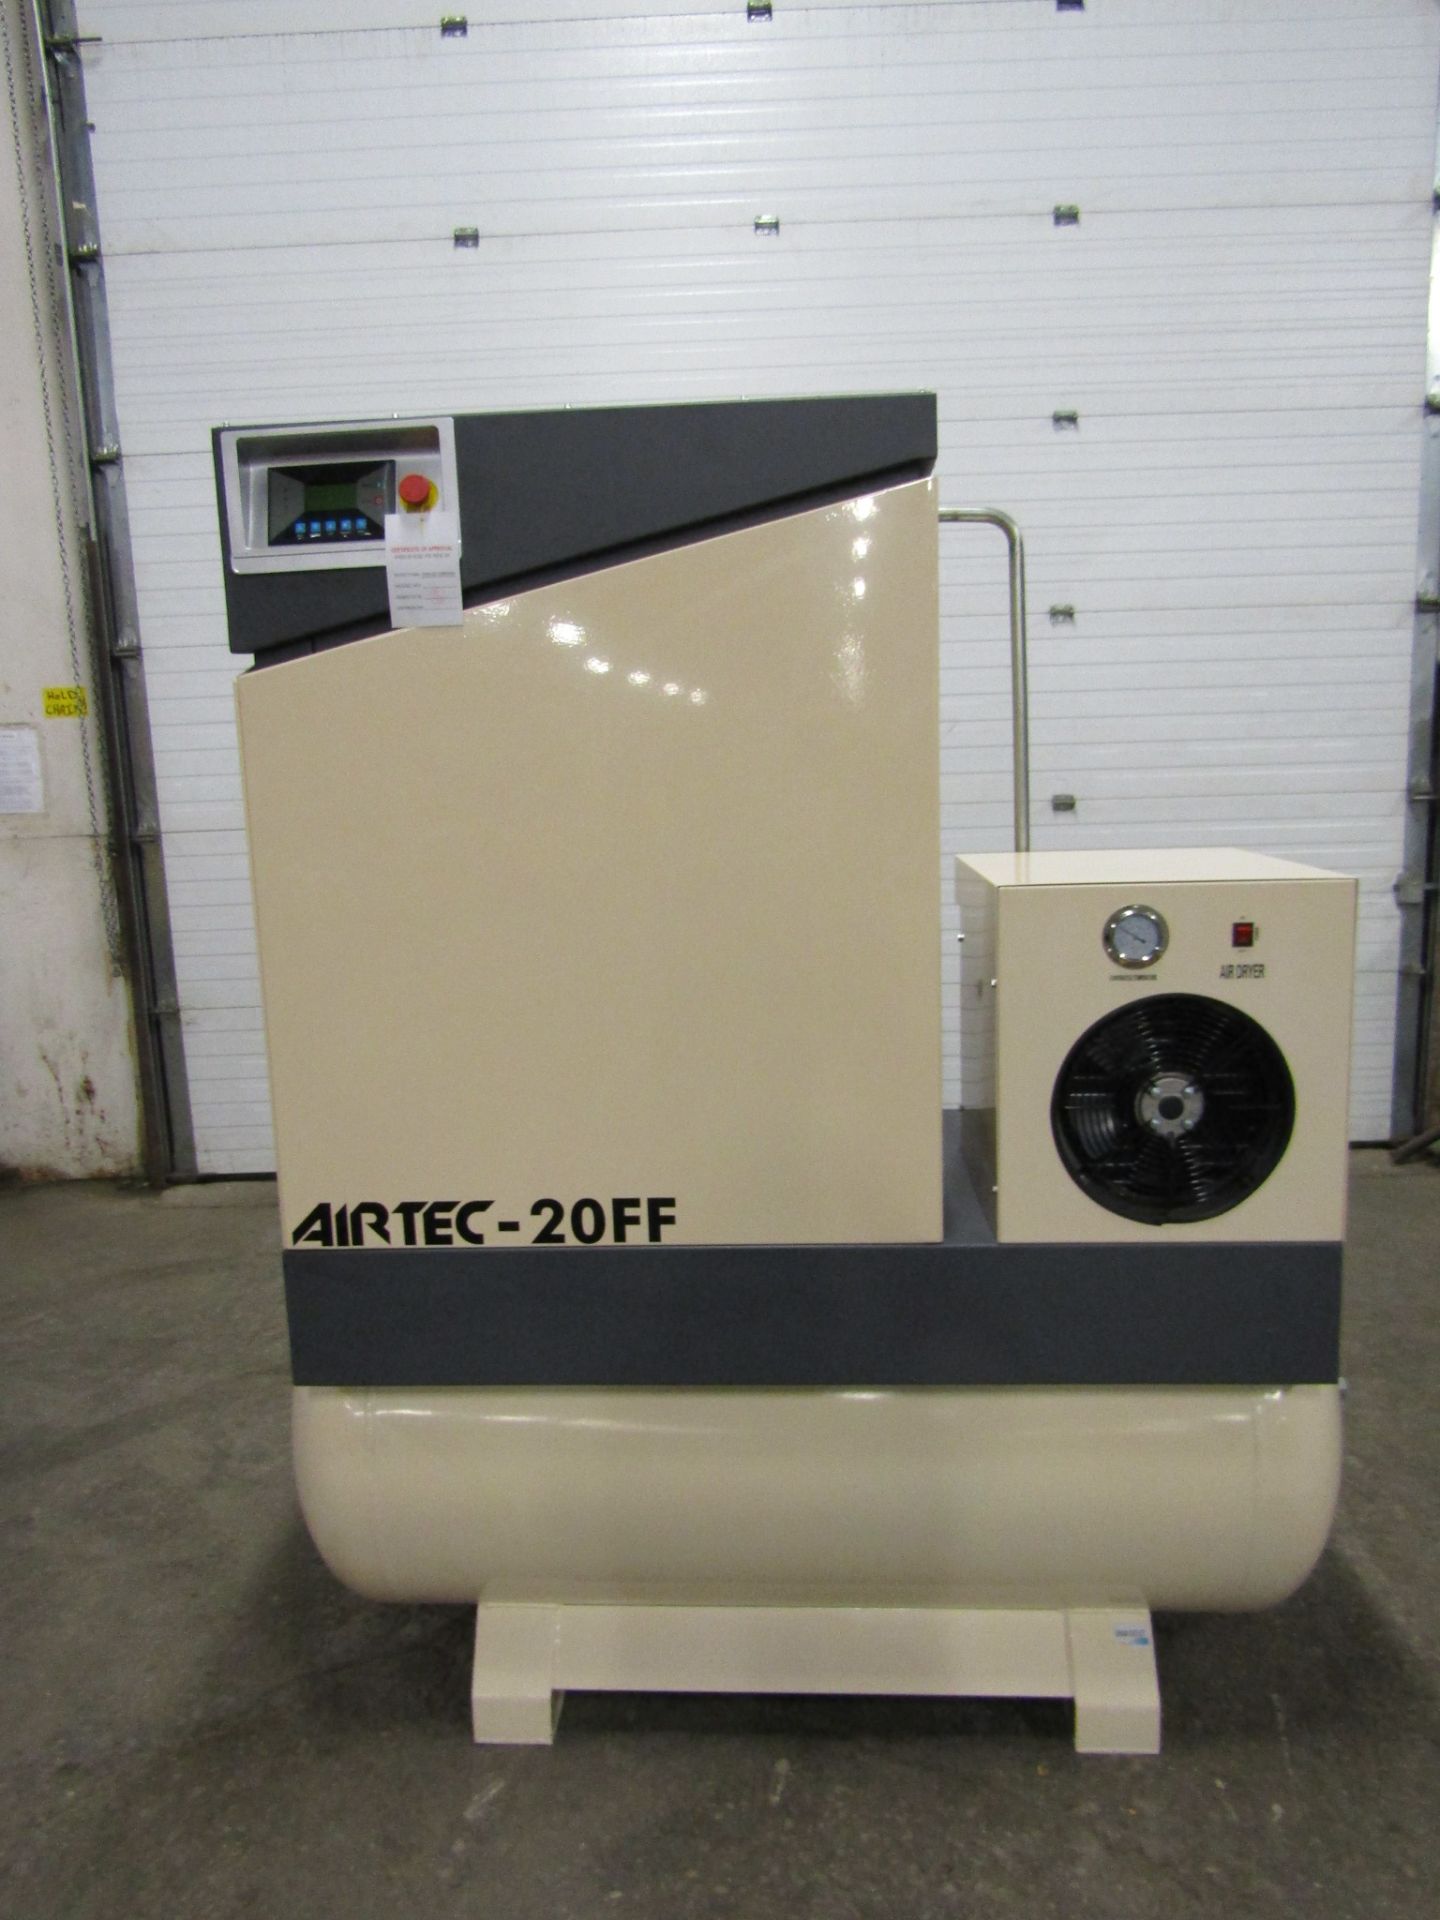 Airtec model 20FF - 20HP Air Compressor with built on DRYER - MINT UNUSED COMPRESSOR with 125 Gallon